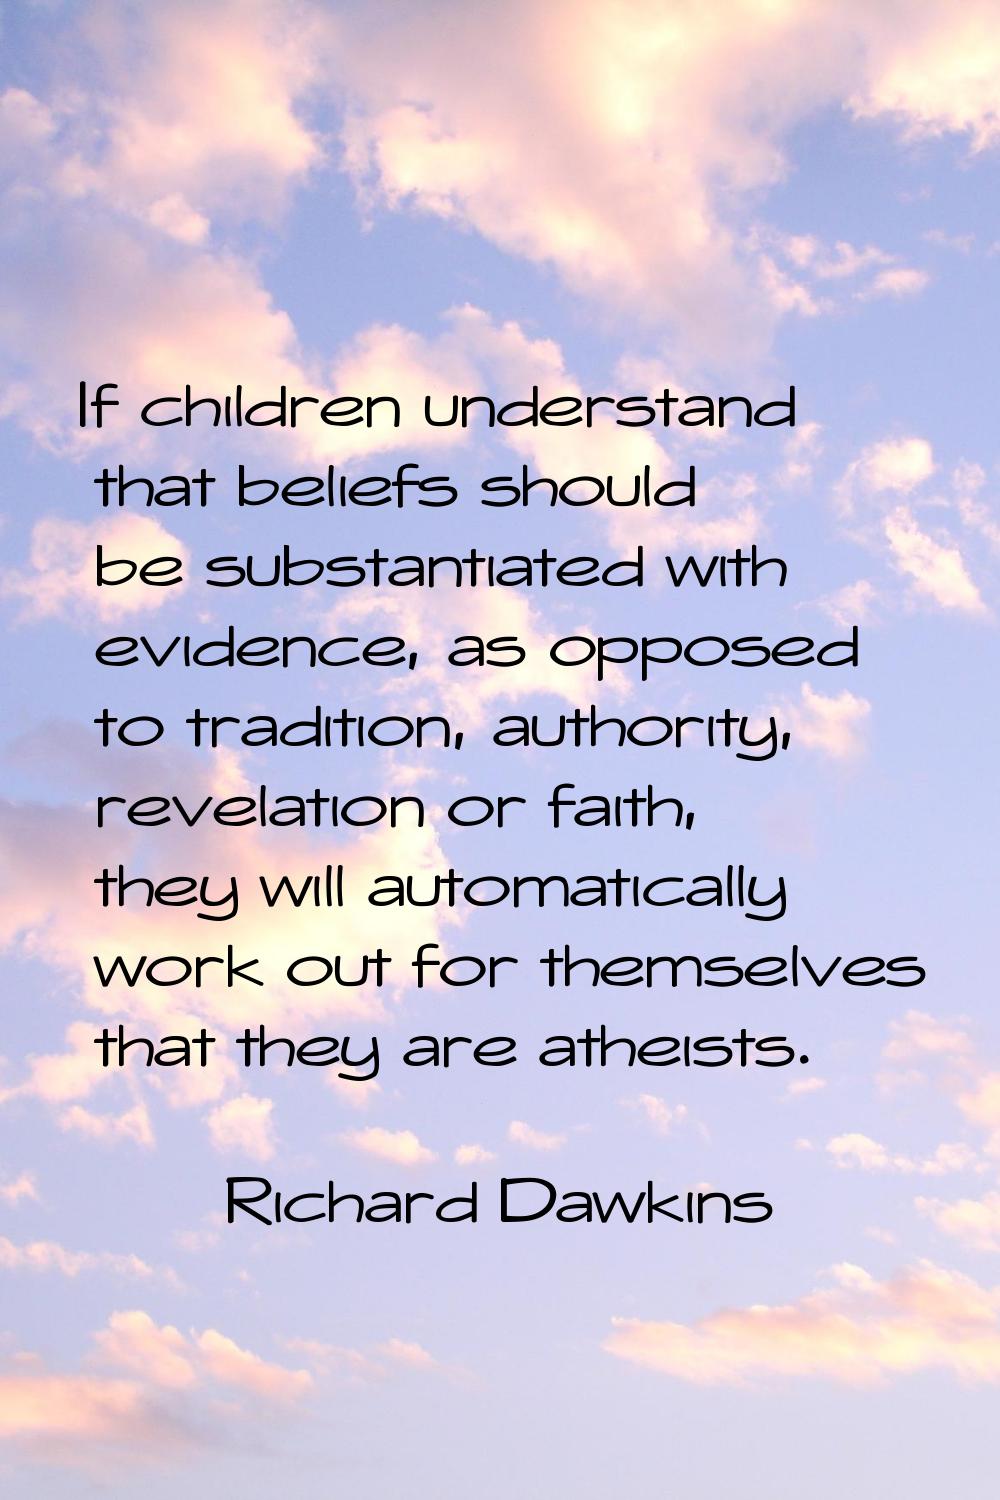 If children understand that beliefs should be substantiated with evidence, as opposed to tradition,